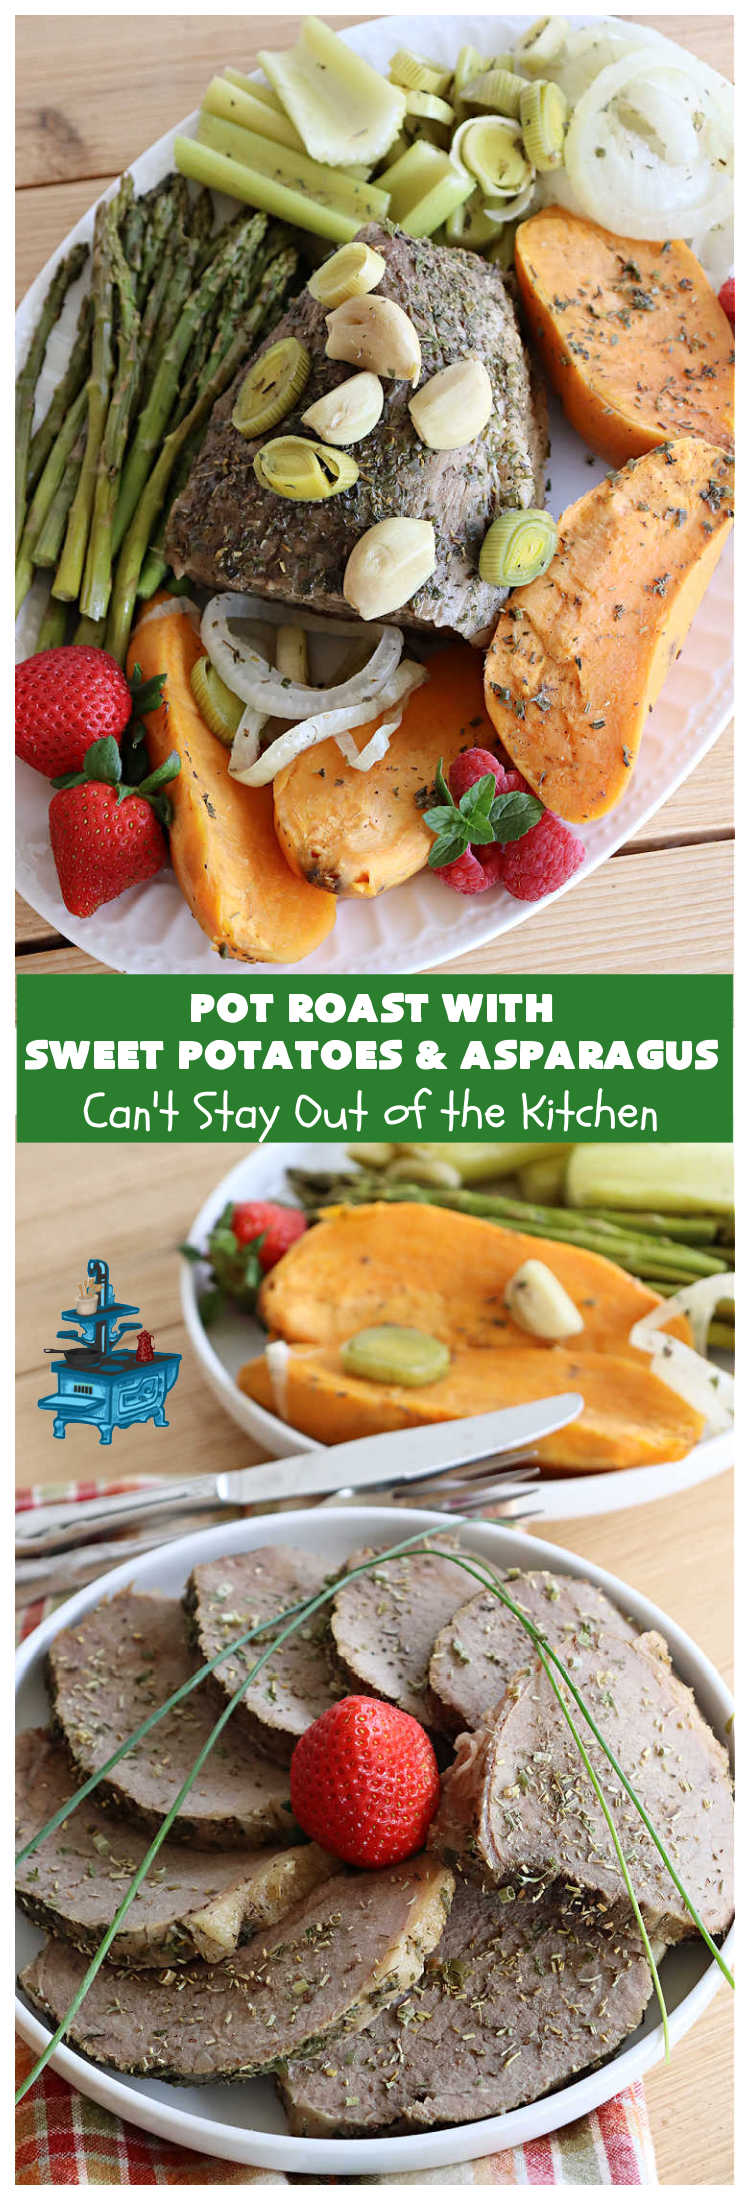 Pot Roast with Sweet Potatoes & Asparagus | Can't Stay Out of the Kitchen | This easy #SlowCooker #recipe is the perfect way to enjoy #PotRoast without the excess calories of gravy! It includes #SweetPotatoes & #asparagus & is seasoned perfectly for #MeatAndPotato lovers. #beef #GlutenFree #PotRoastWithSweetPotatoesAndAsparagus